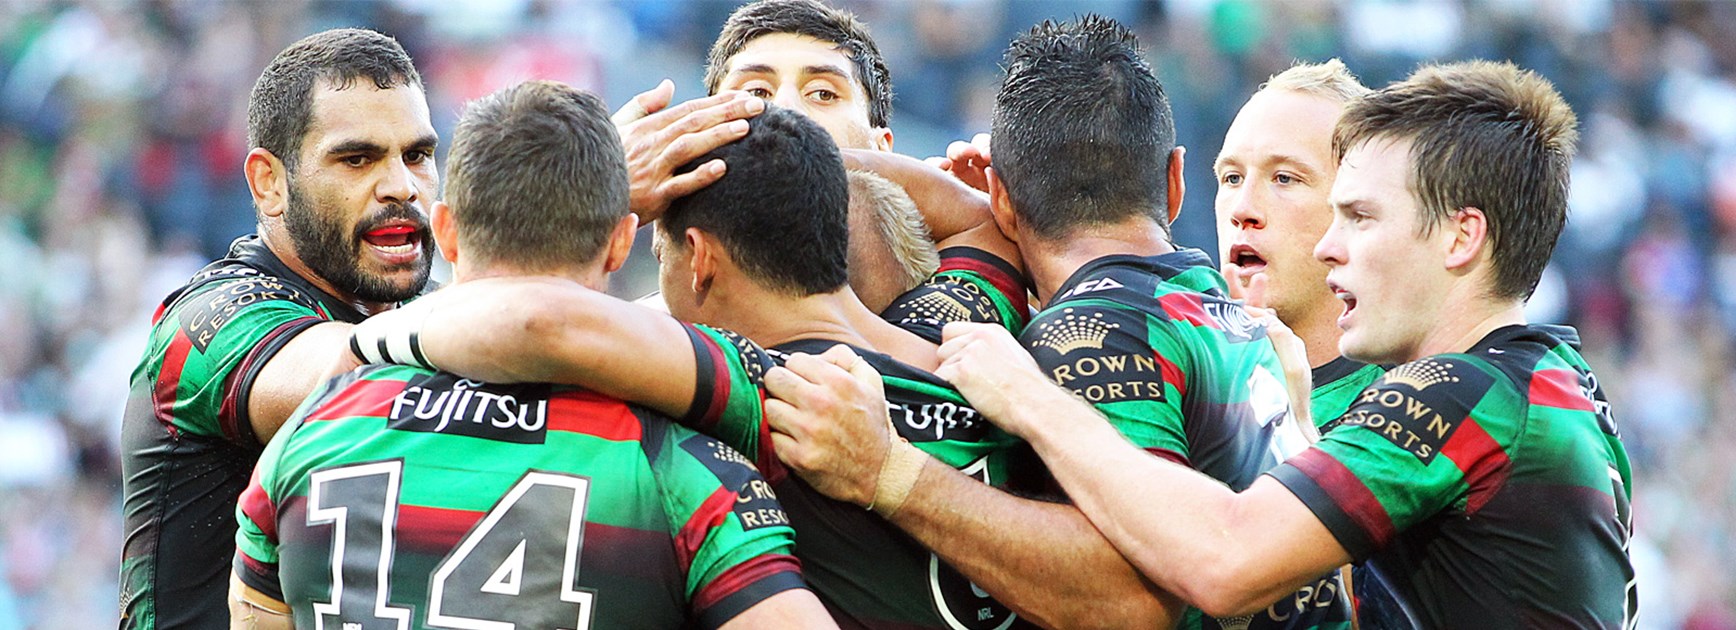 The Rabbitohs were far too good for Newcastle on Saturday.